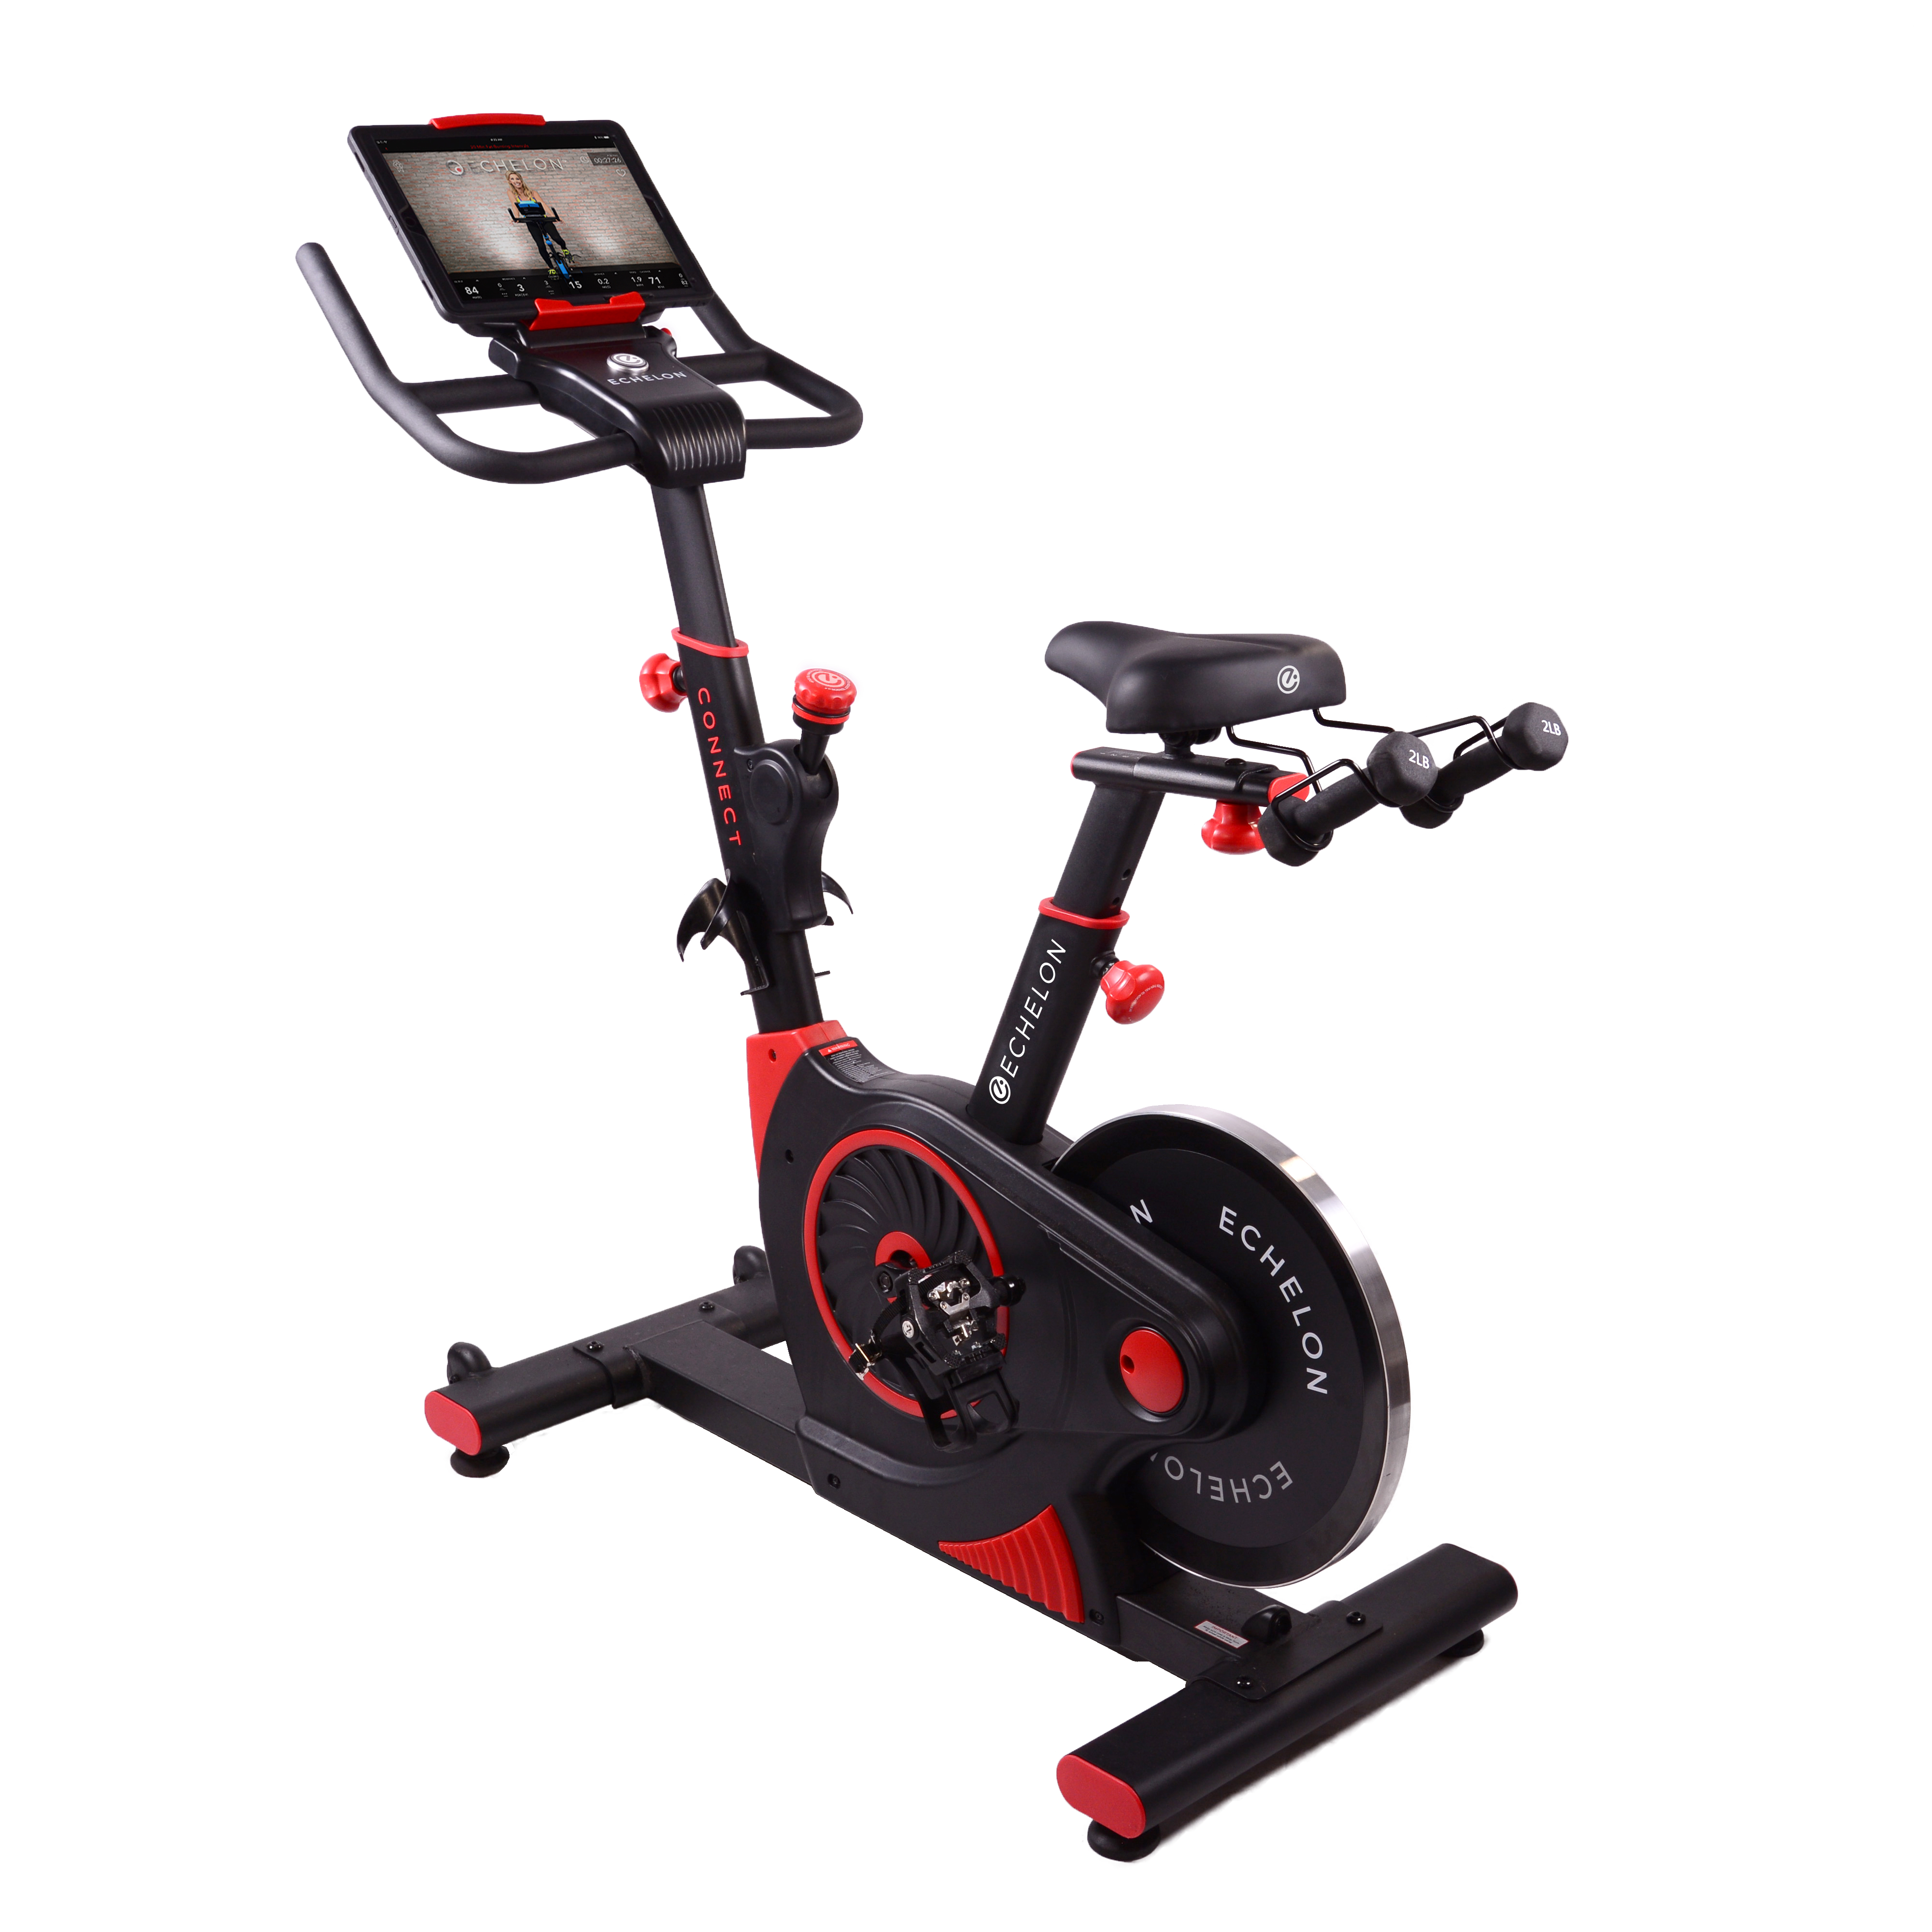 Echelon EX1 Smart Connect Indoor Cycling Exercise Bike with 90 Day Free Premier Membership ($105 Value) - image 4 of 9